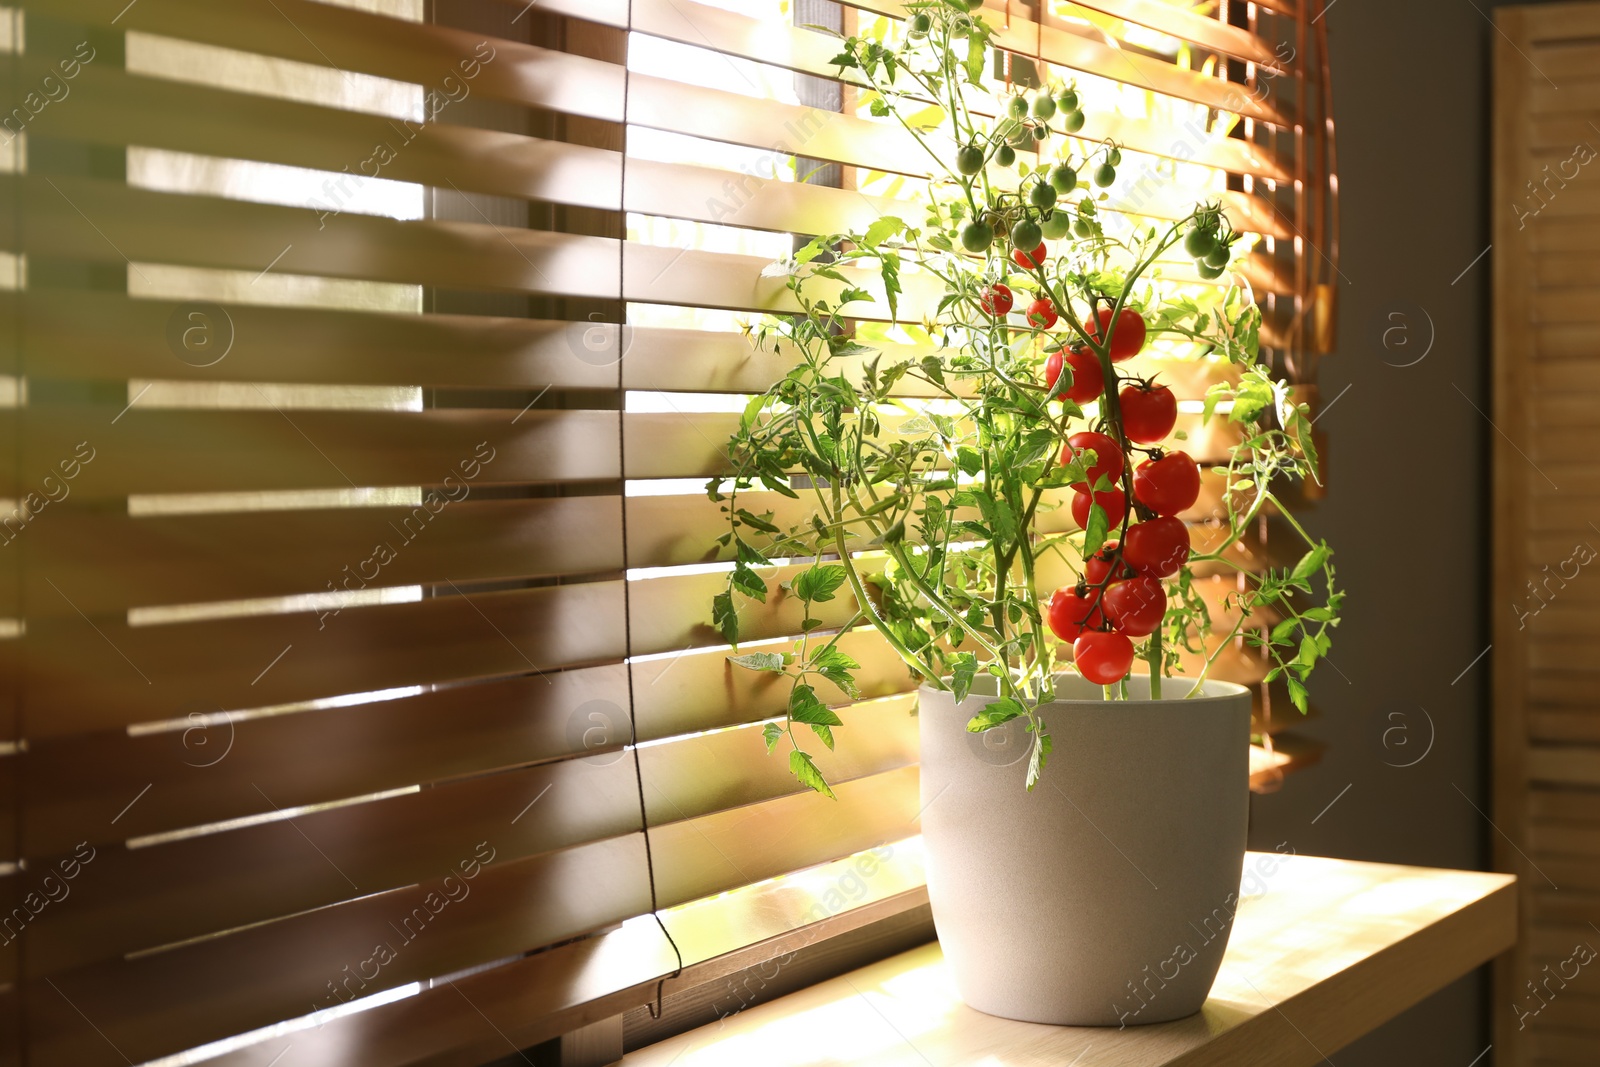 Photo of Tomato plant in pot on window sill indoors